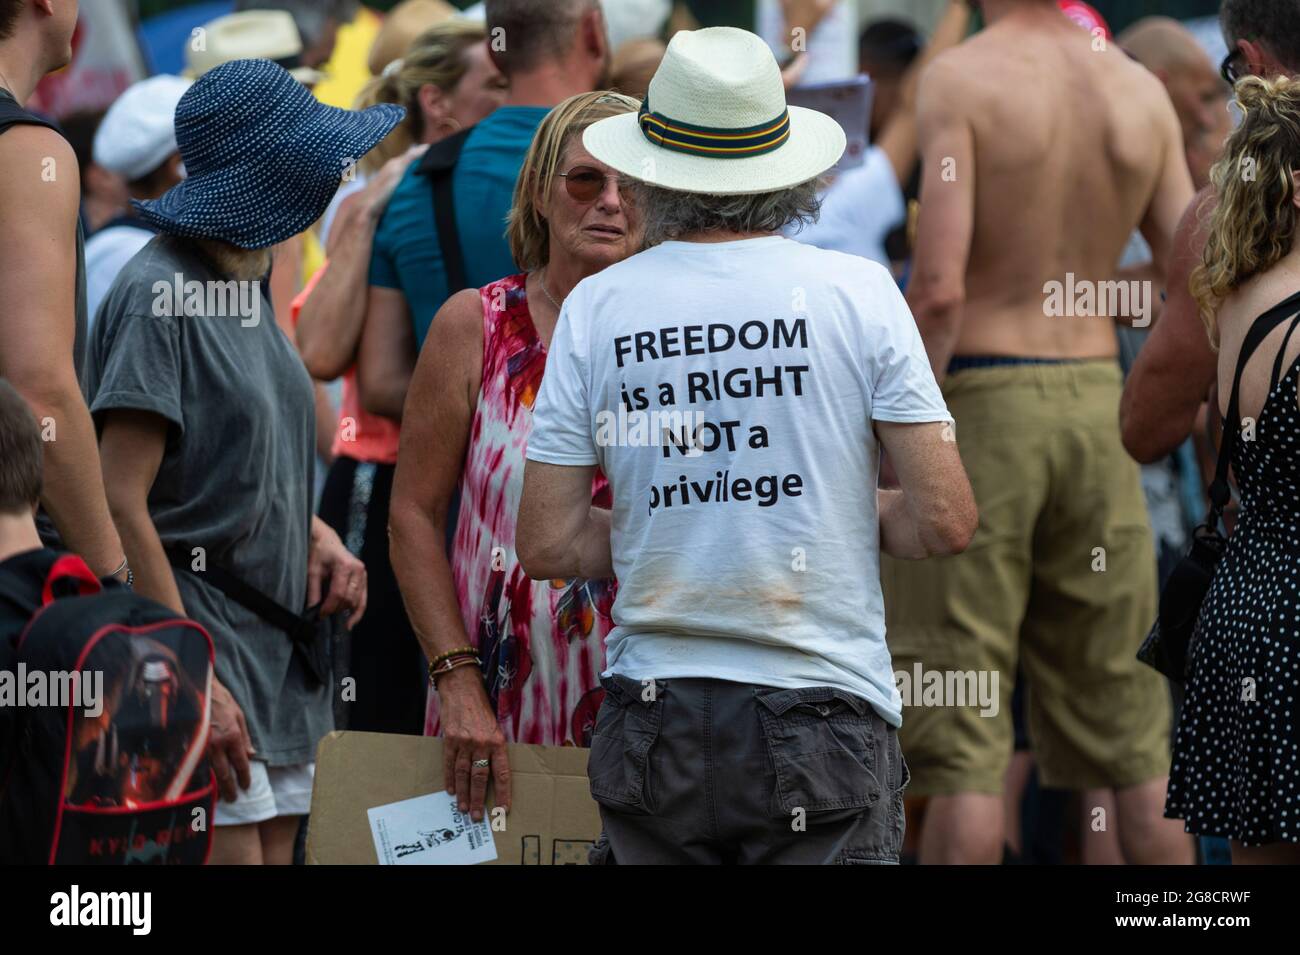 London, UK.  19 July 2021.  People at an anti-vaccine protest in Parliament Square, on what has been dubbed Freedom Day, when the UK government relaxed remaining coronavirus lockdown restrictions but the numbers of positive cases continues to increase daily and scientists are concerned that restrictions have been eased too soon. Credit: Stephen Chung / Alamy Live News Stock Photo